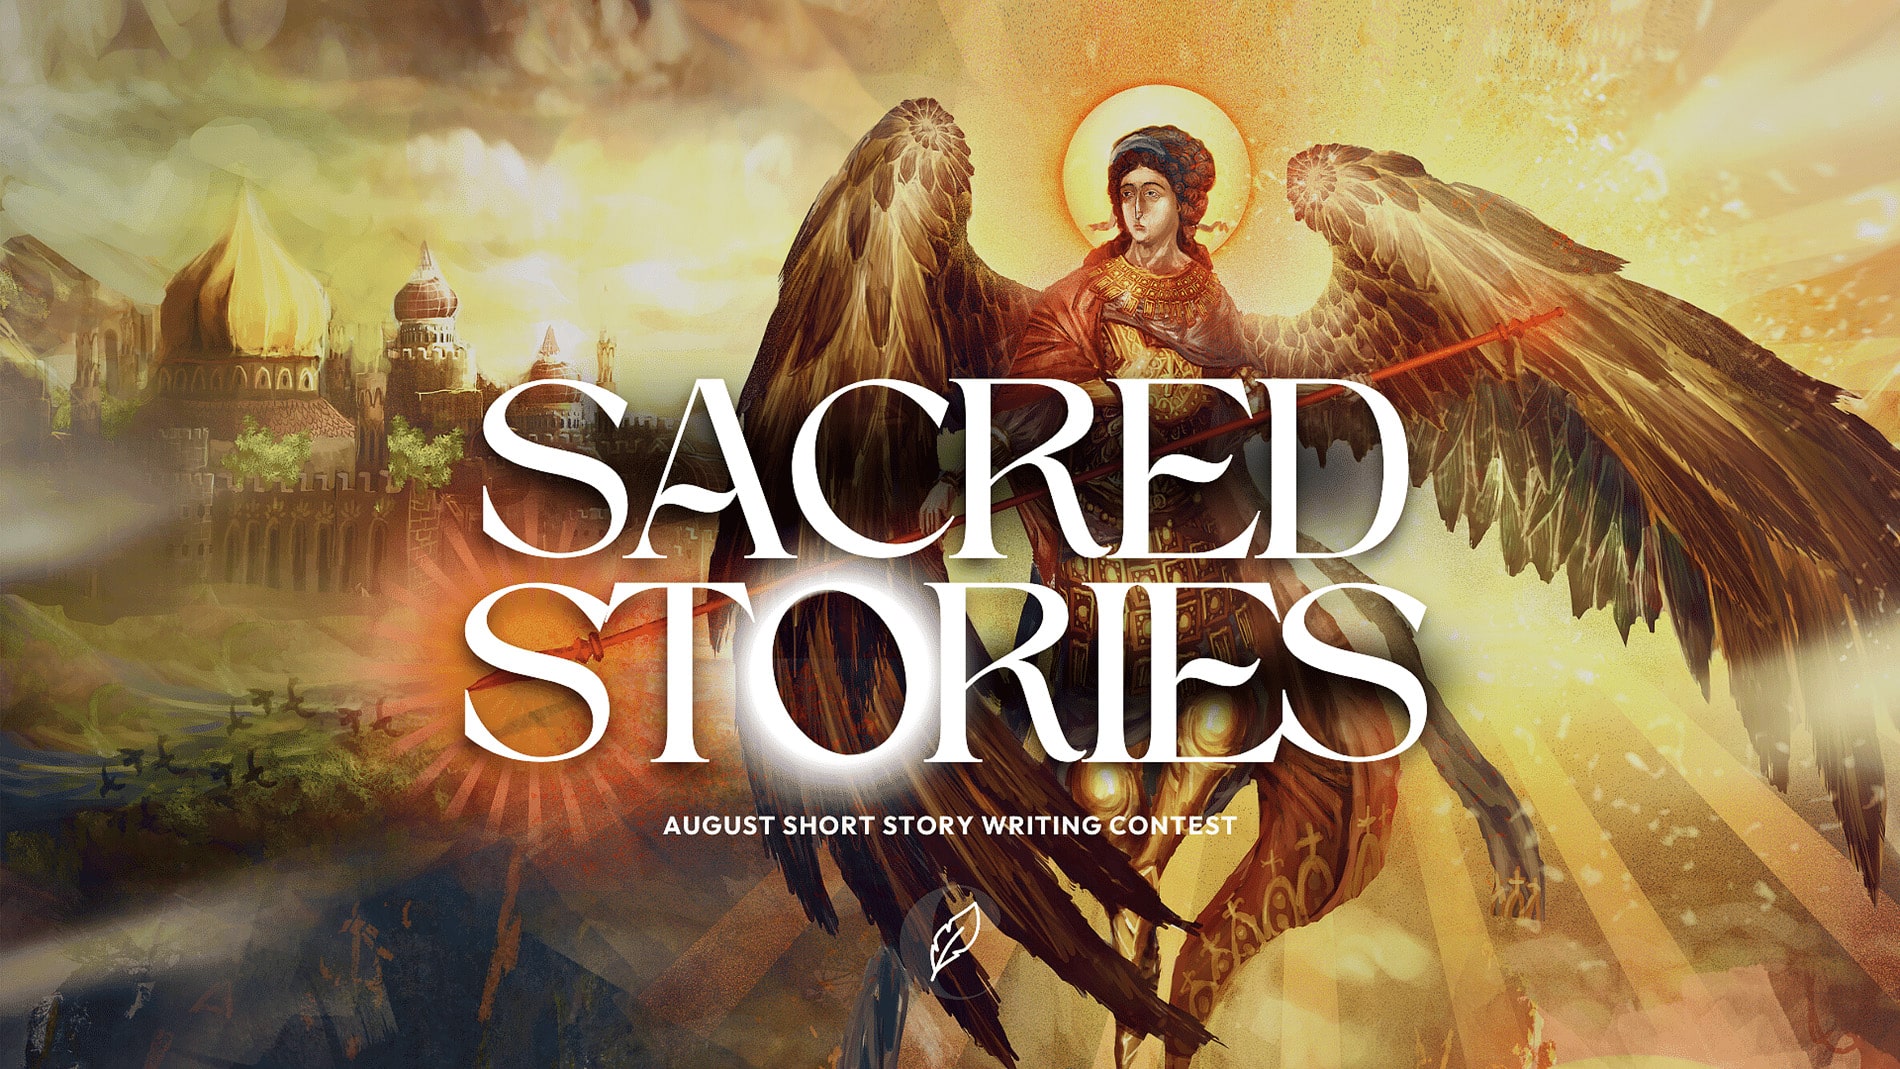 Enter the 2022 Sacred Stories Contest, hosted by CatholicAuthor